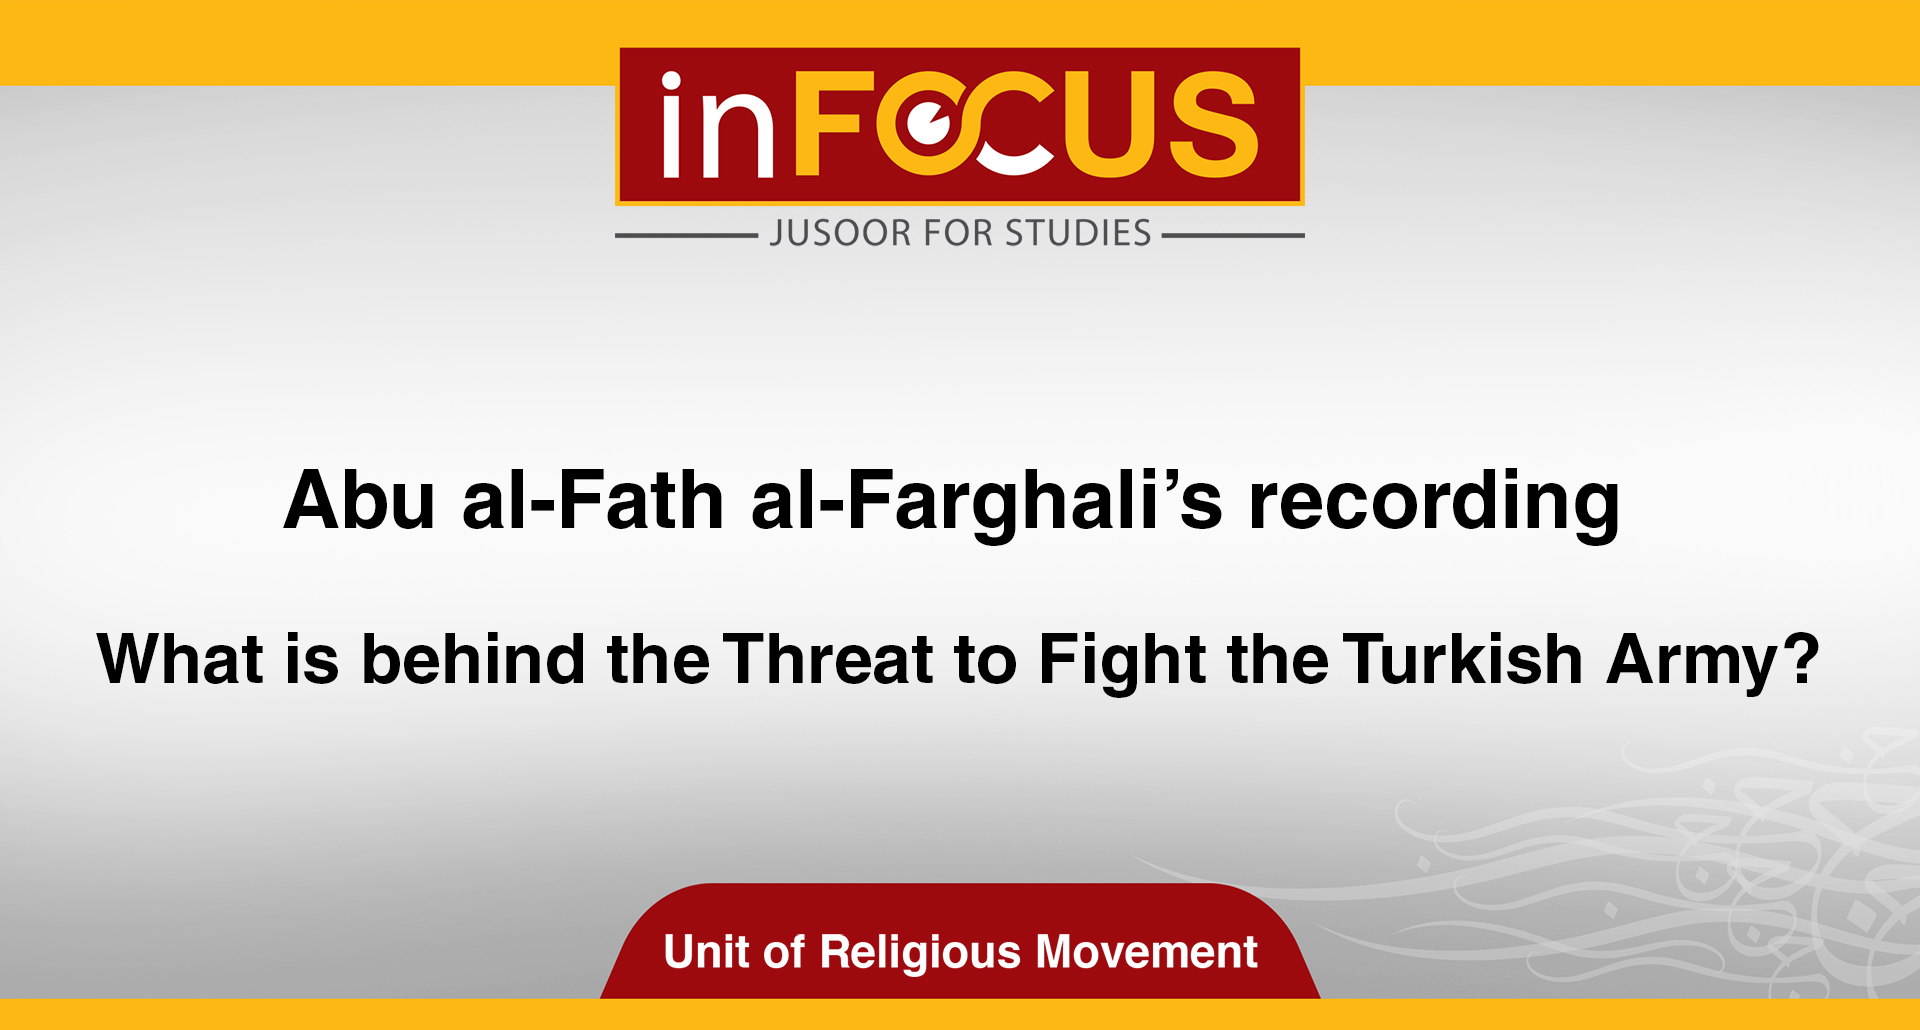 Abu al-Fath al-Farghali’s recording.. What is behind the Threat to Fight the Turkish Army?